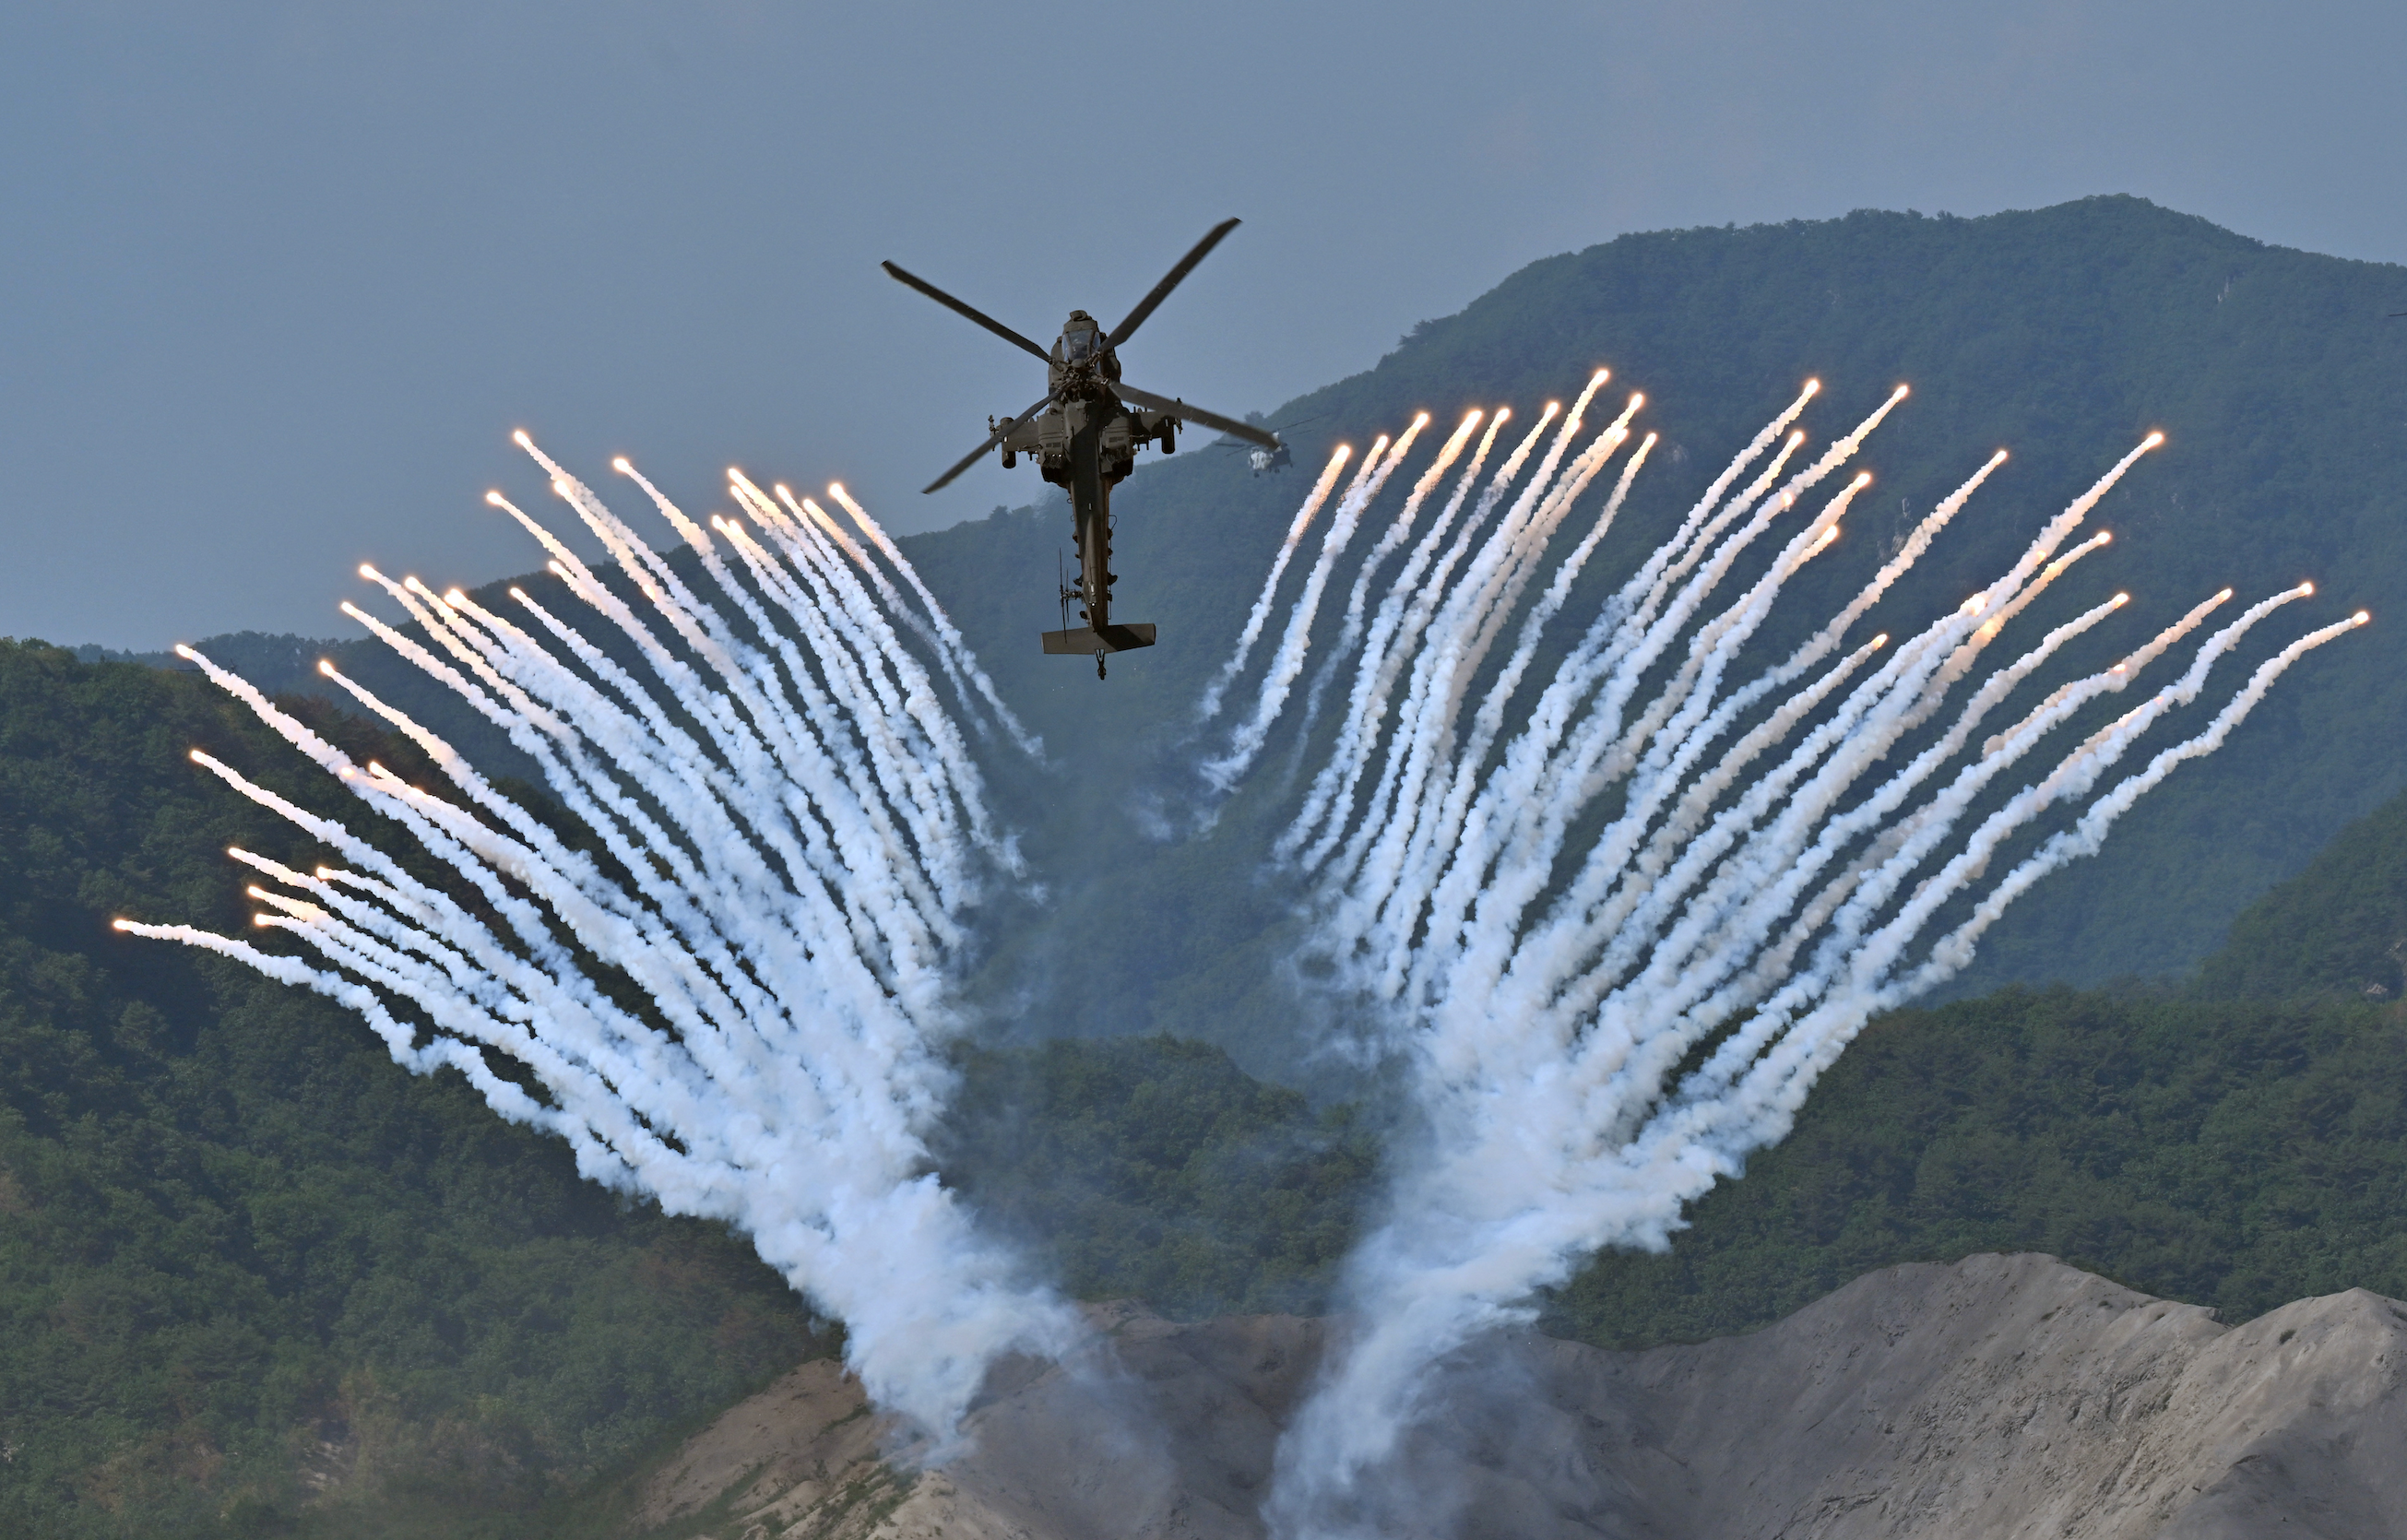  A South Korean Apache AH-64 helicopter fires flares during a South Korea-US joint military drill at Seungjin Fire Training Field